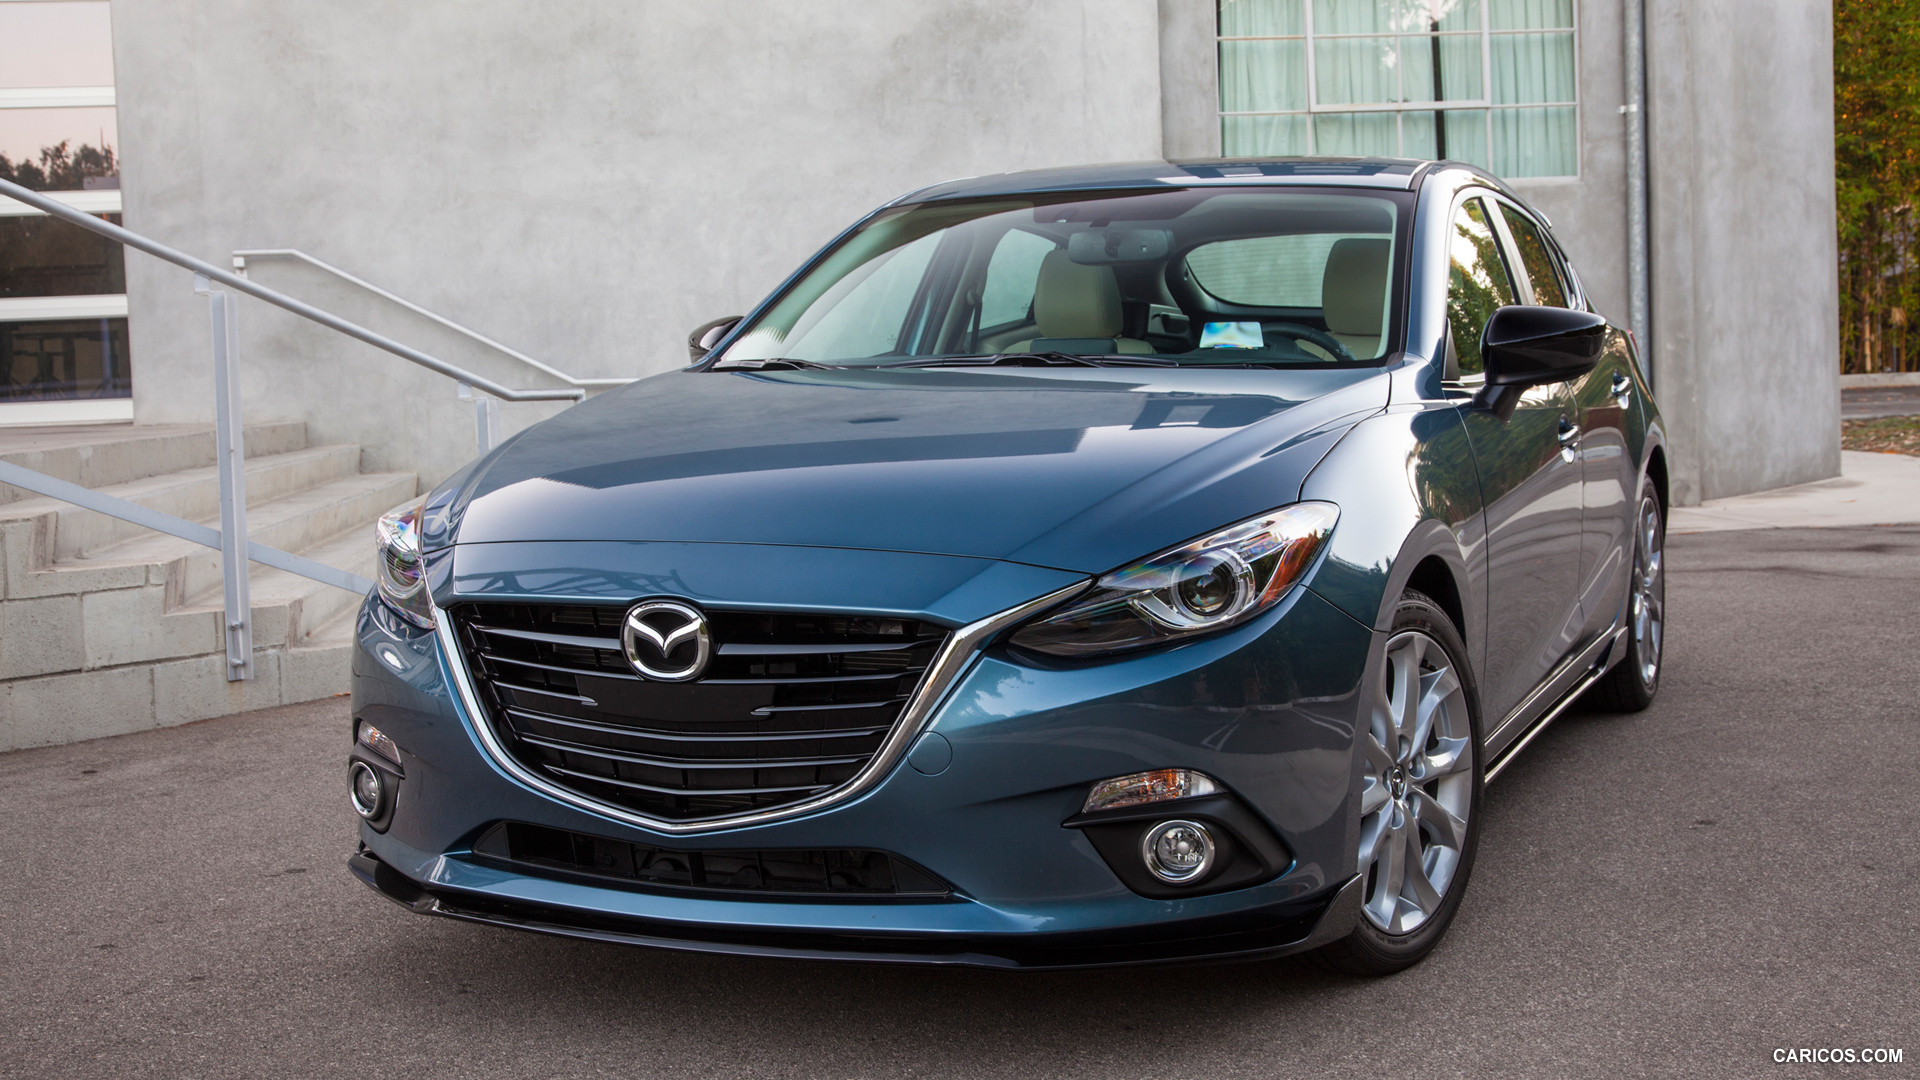 2015 Mazda 3 5D s Touring 6MT (Blue Reflex)  - Front, #21 of 27